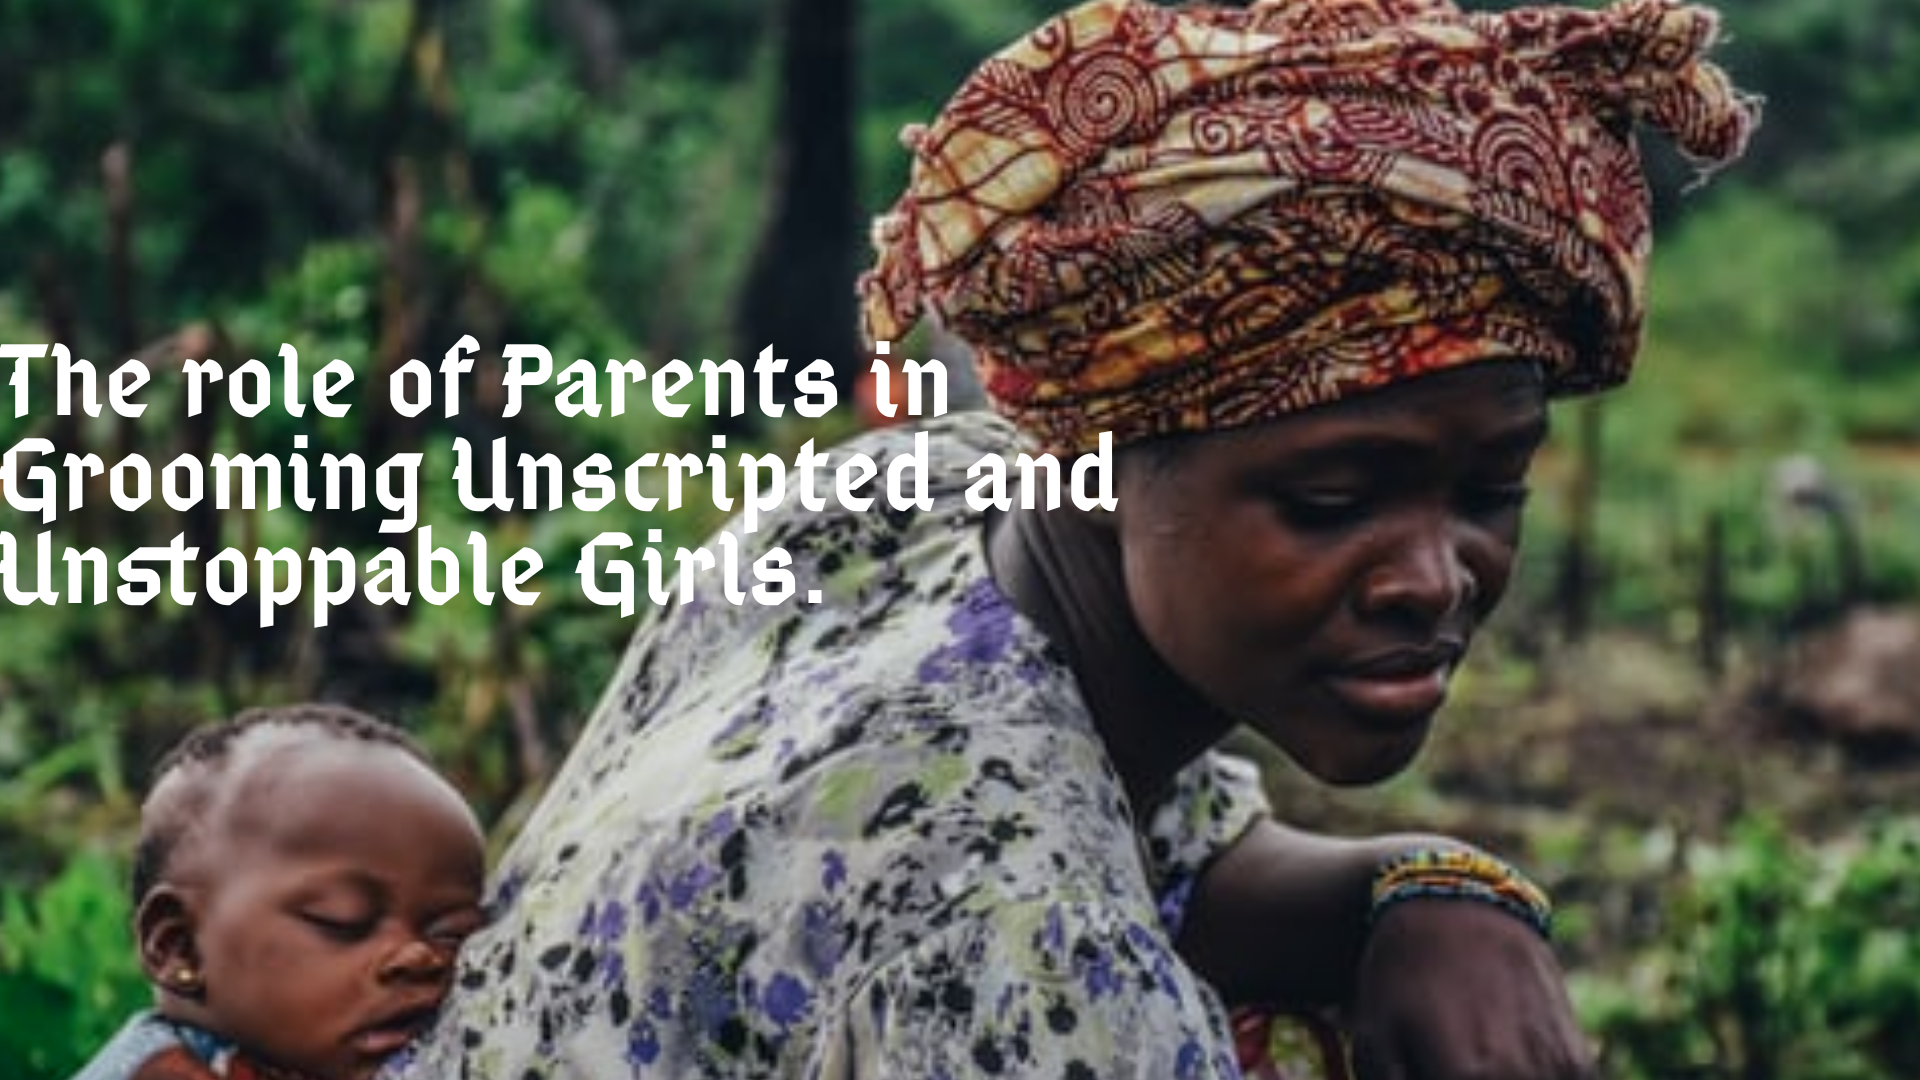 THE ROLE OF PARENTS IN GROOMING UNSCRIPTED AND UNSTOPPABLE GIRLS.